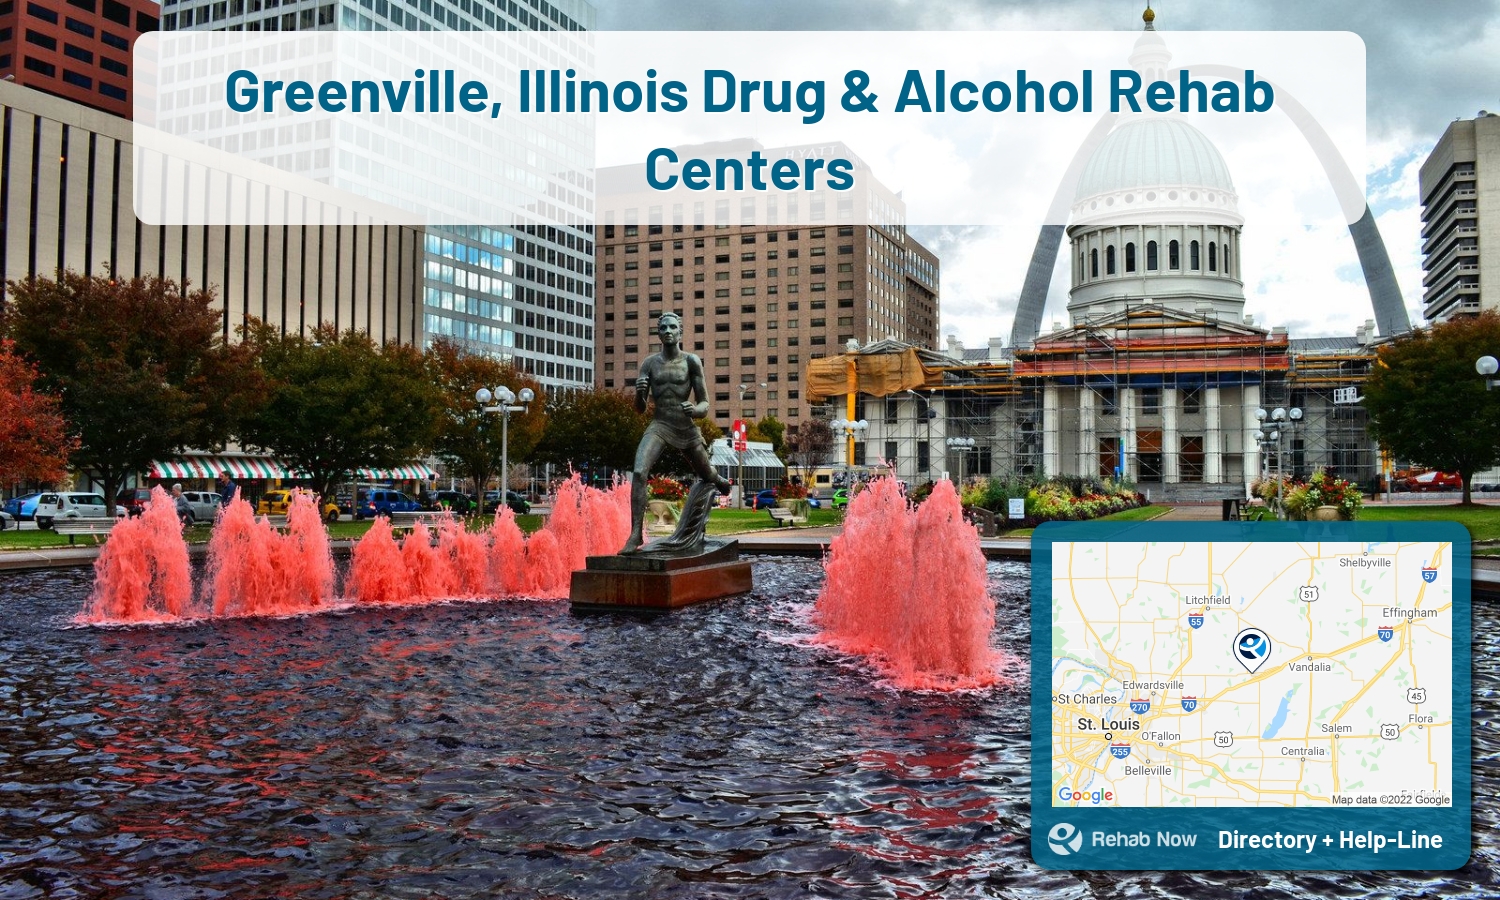 Find drug rehab and alcohol treatment services in Greenville. Our experts help you find a center in Greenville, Illinois